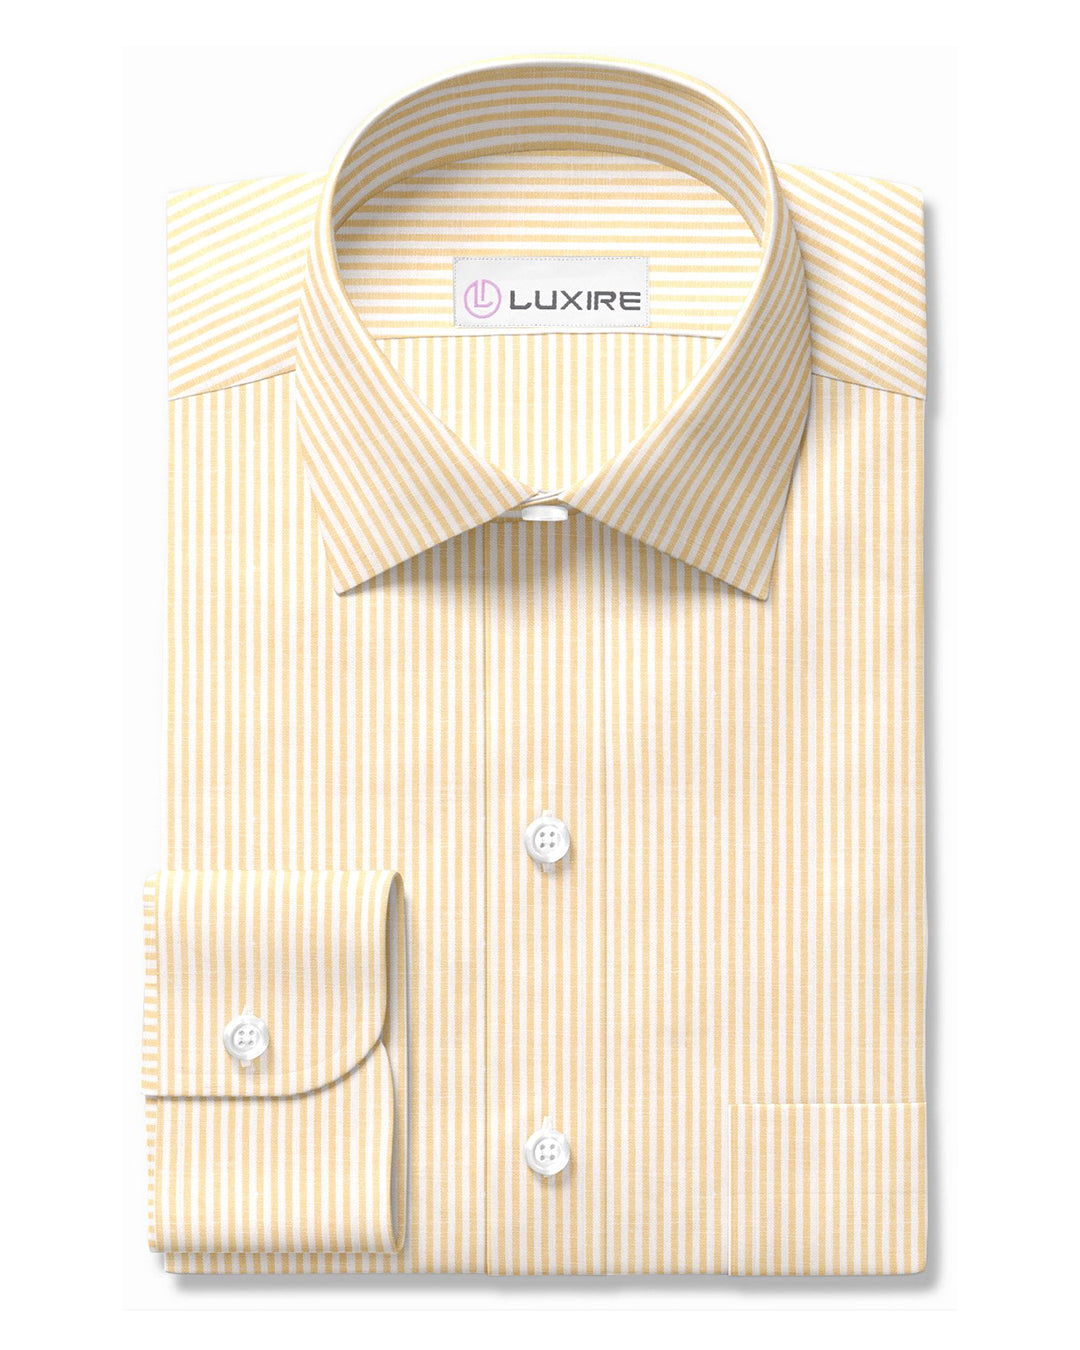 Front of the custom linen shirt for men in yellow candystripes by Luxire Clothing